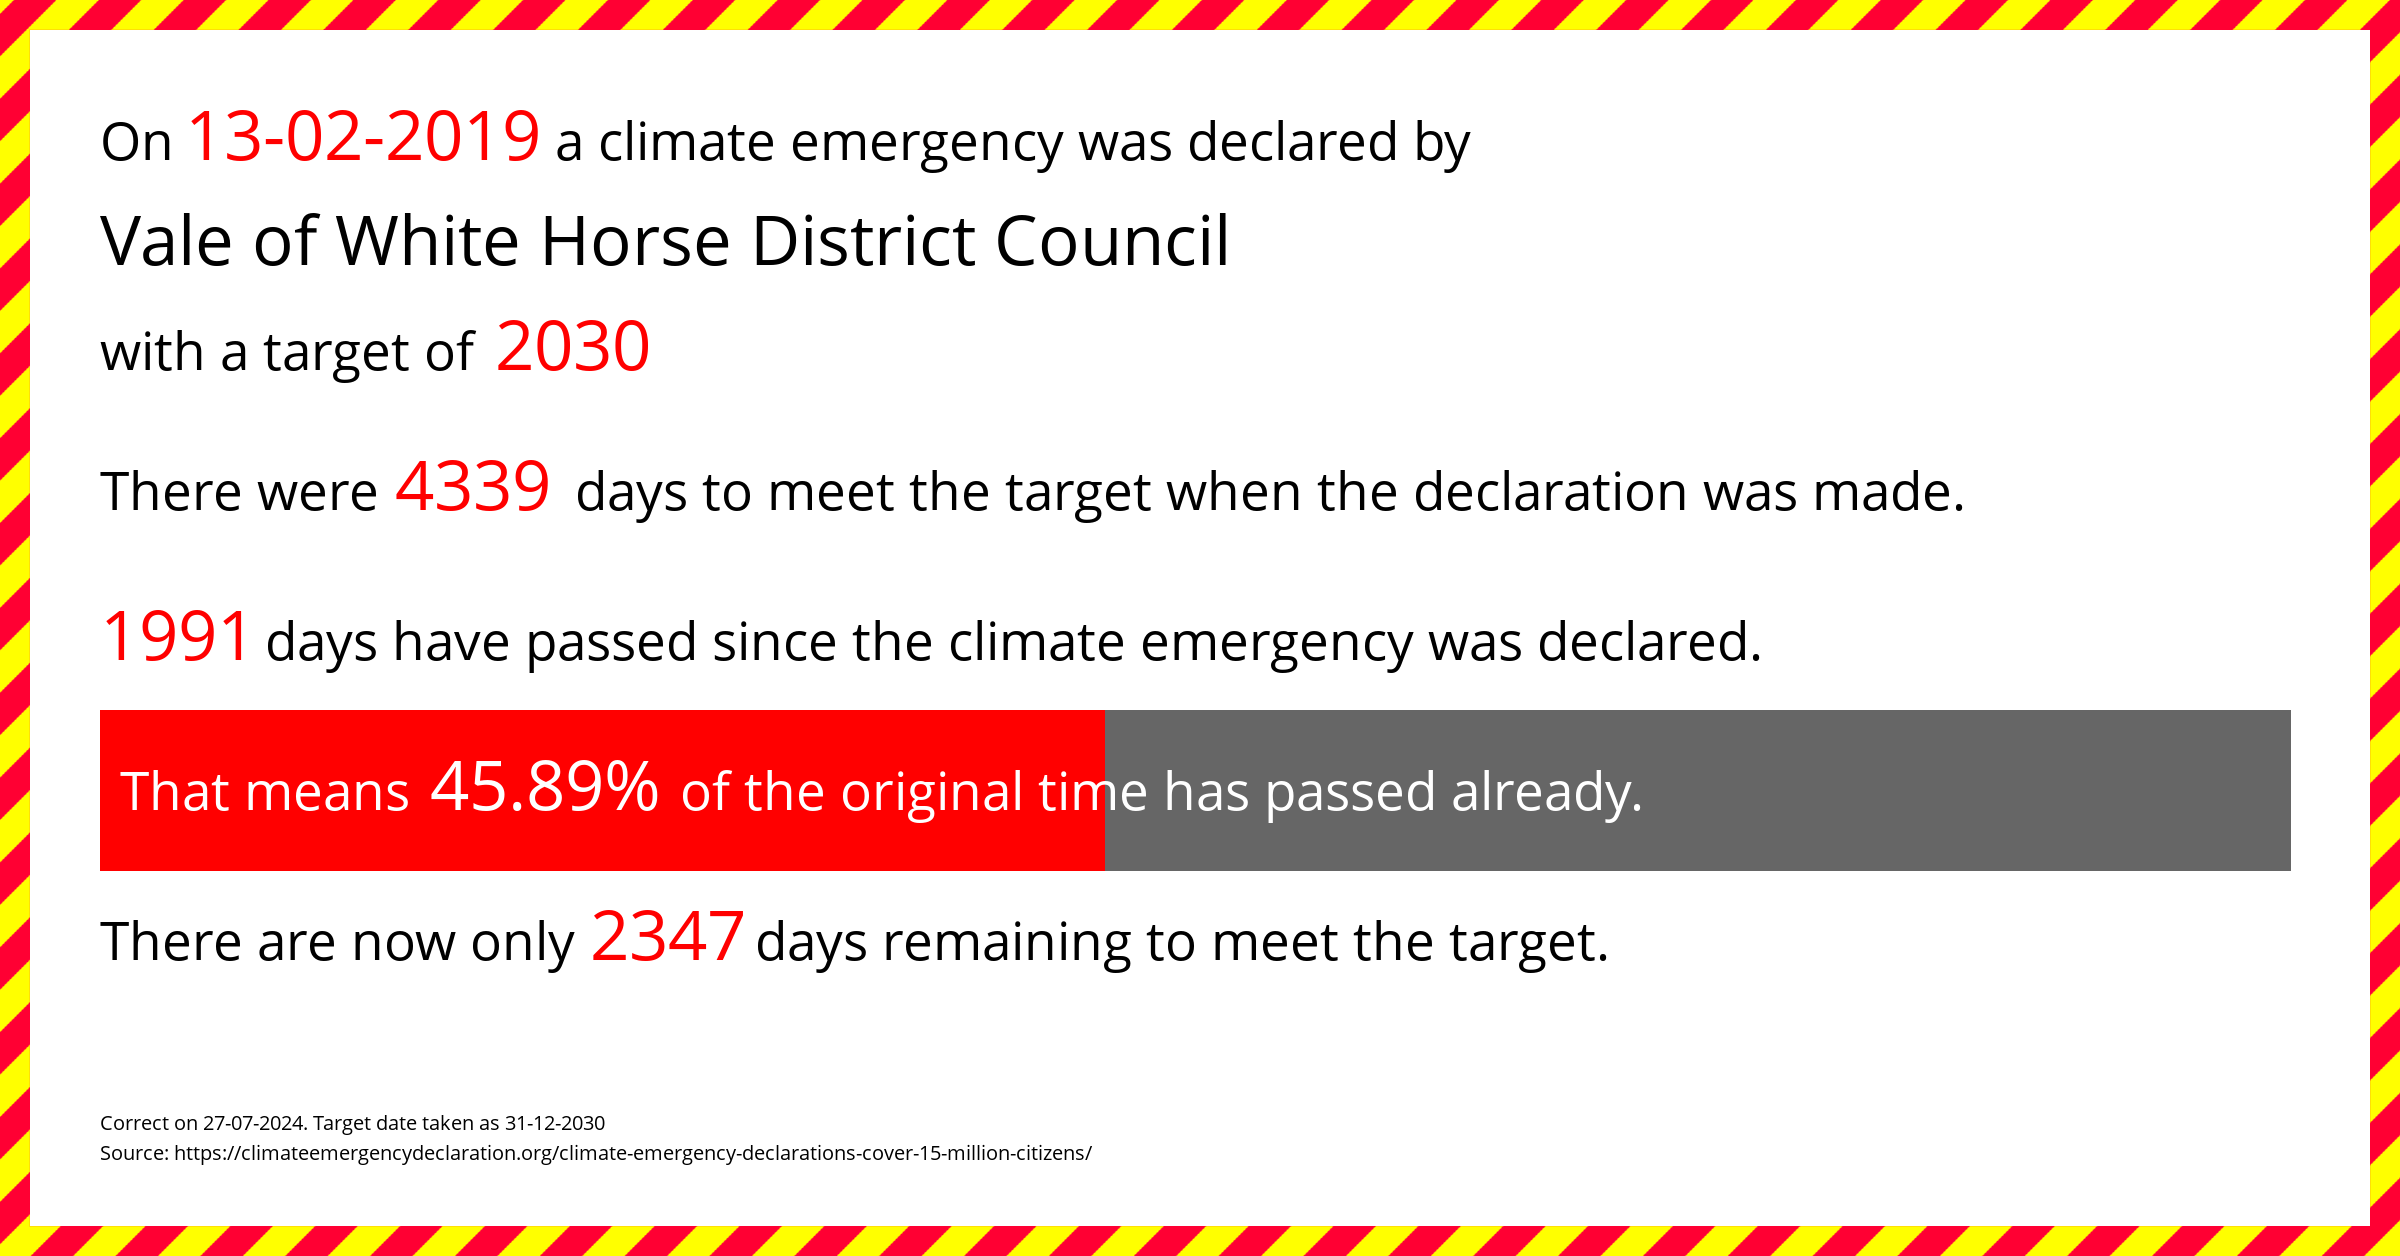 Vale of White Horse District Council declared a Climate emergency on Wednesday 13th February 2019, with a target of 2030.